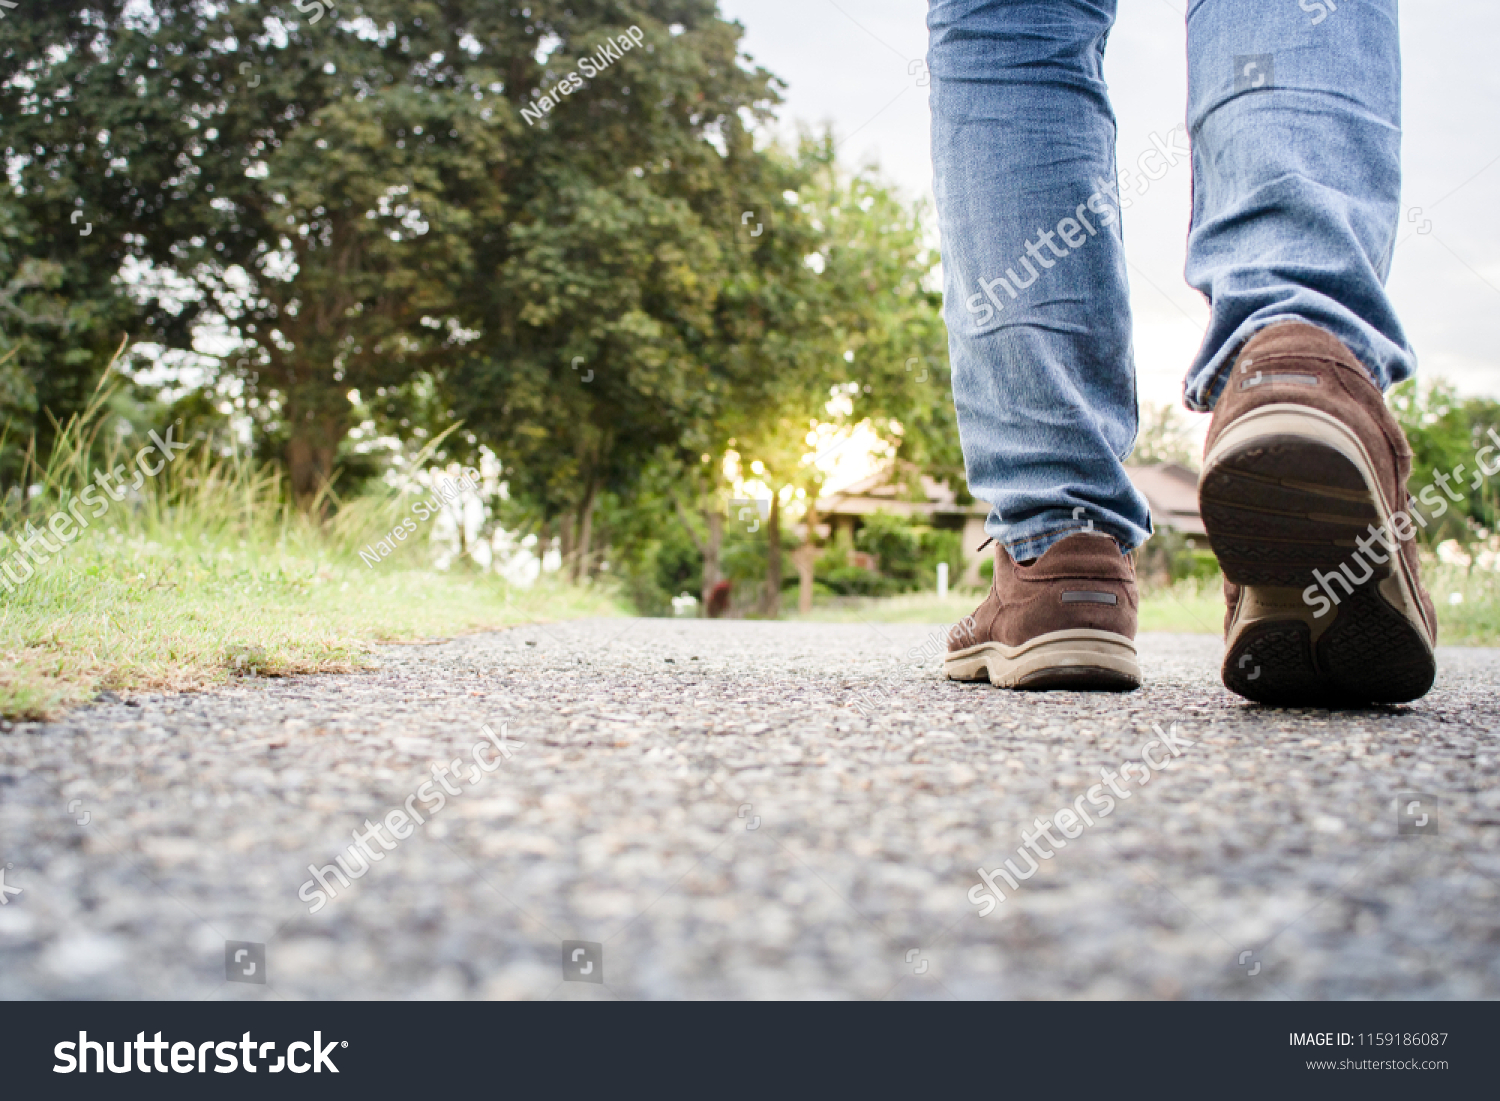 close up of boy shoes walking on the street in the evening #1159186087